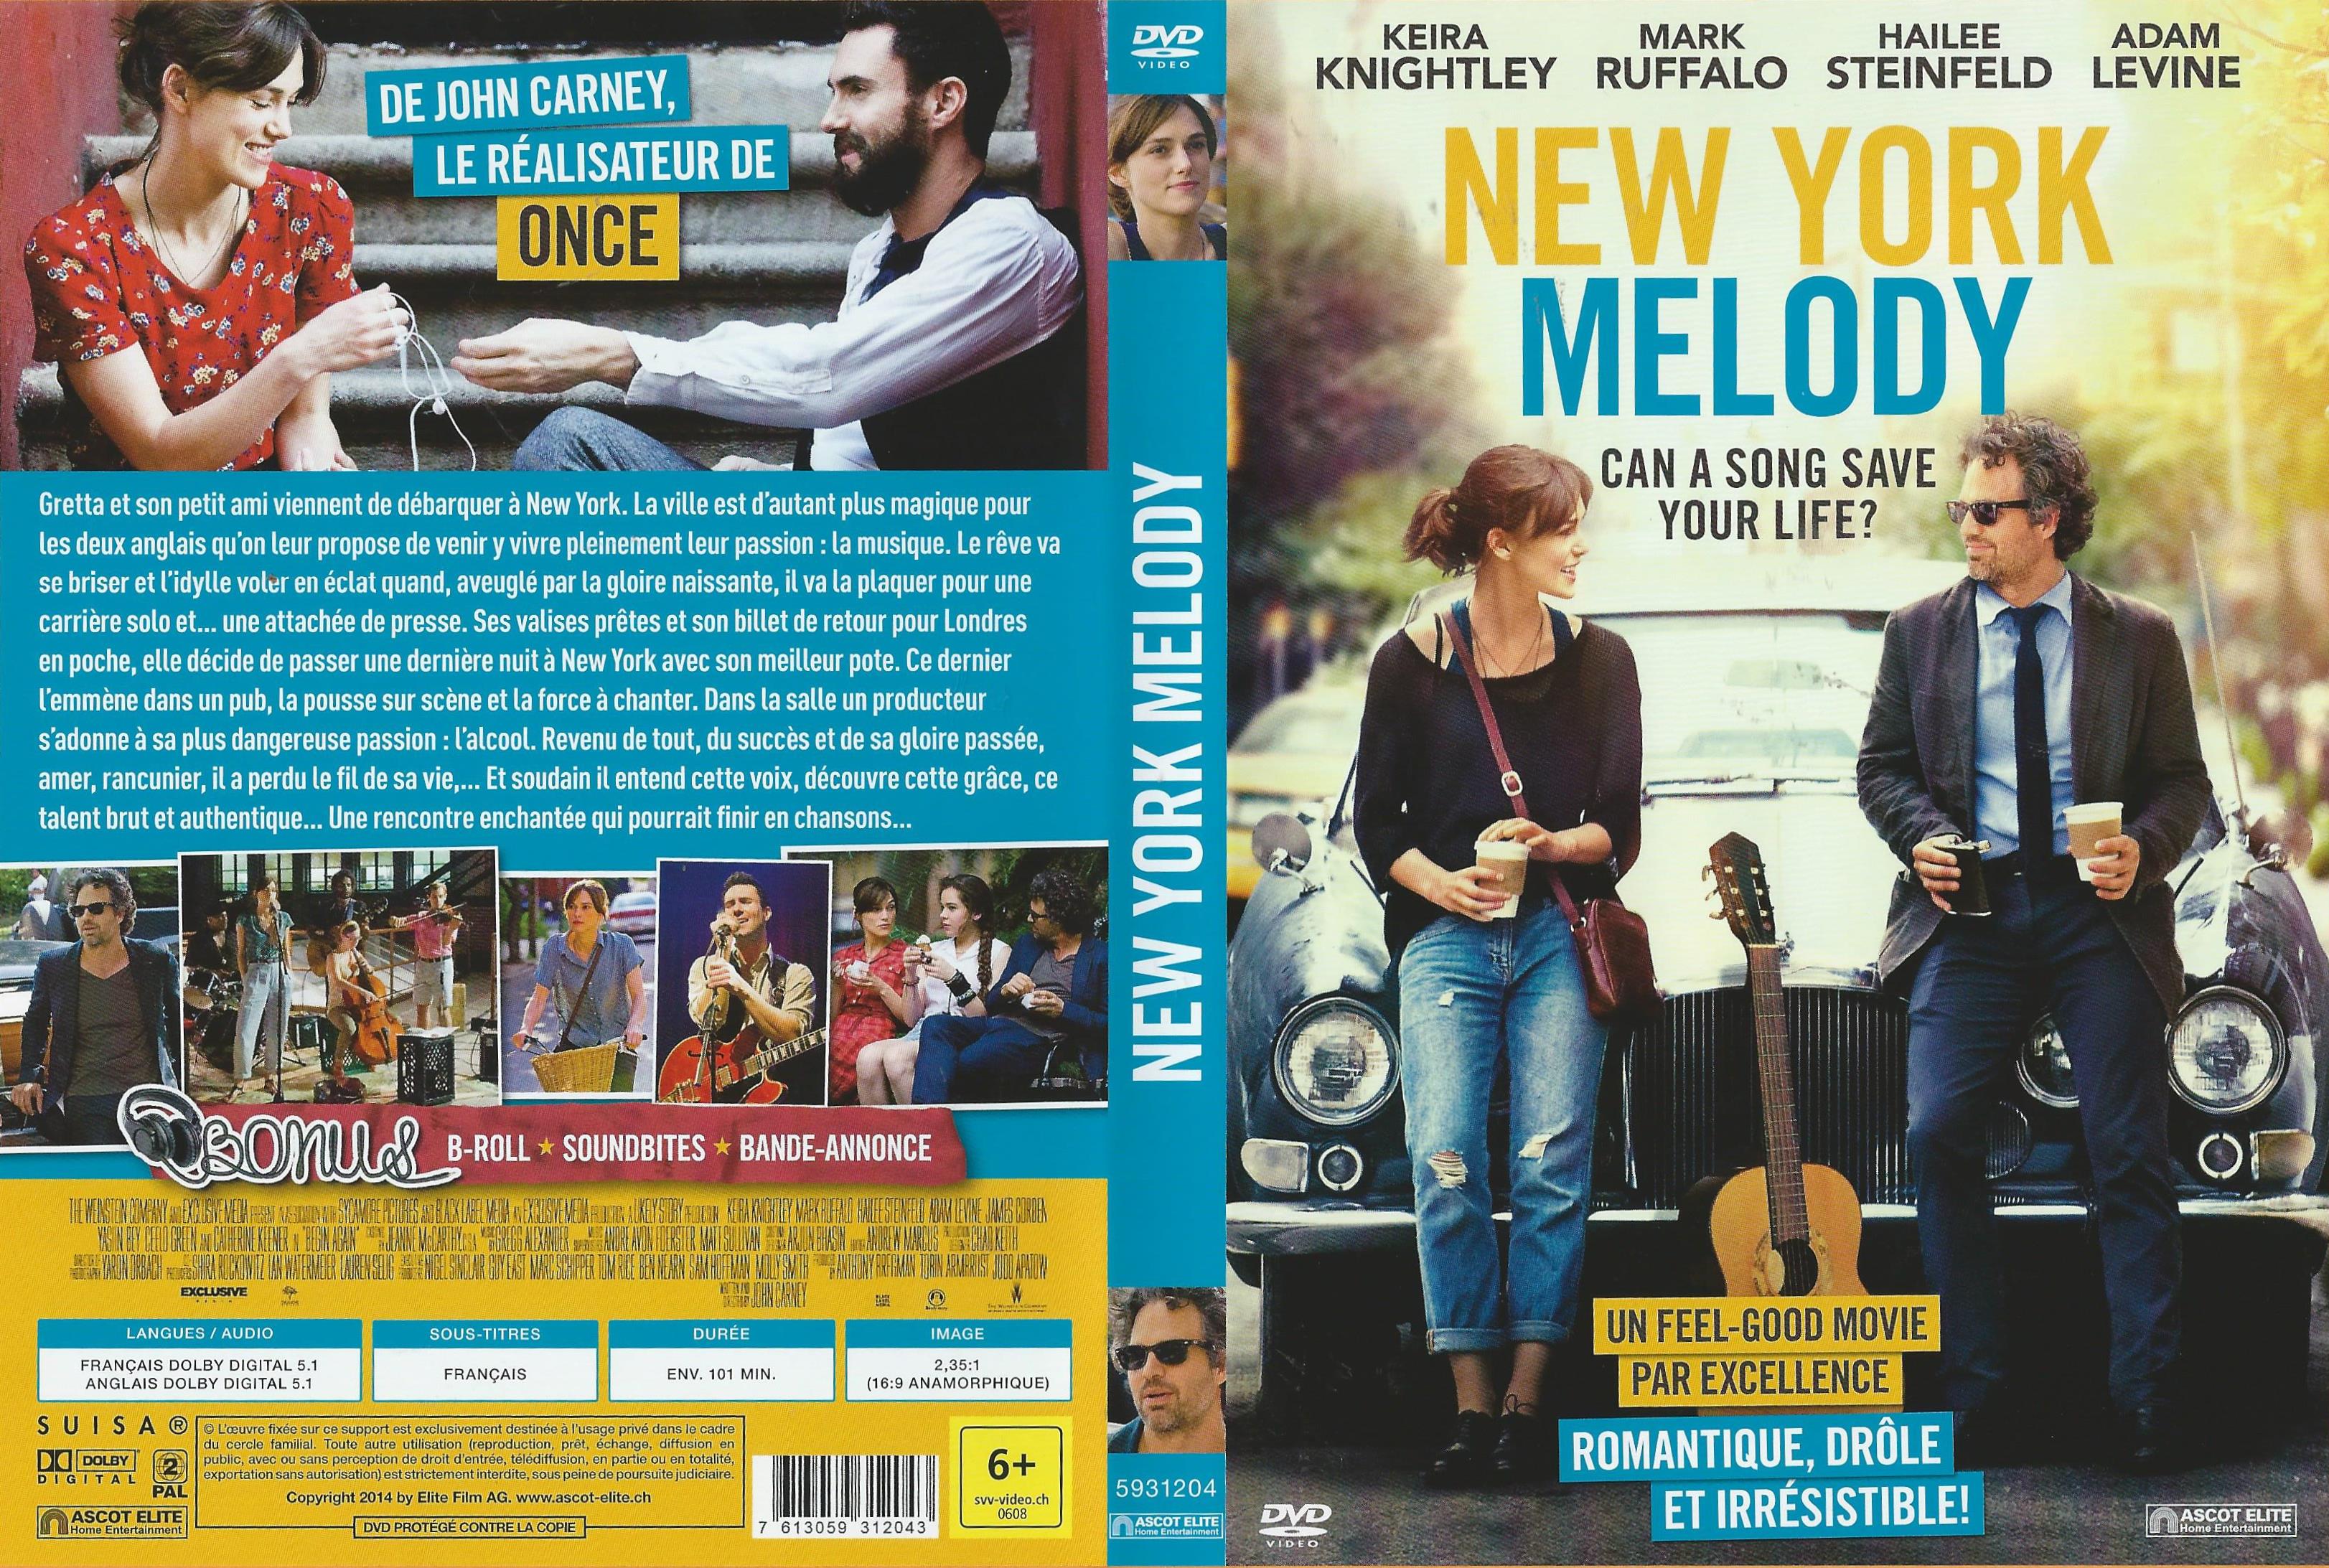 Jaquette DVD New York melody v2